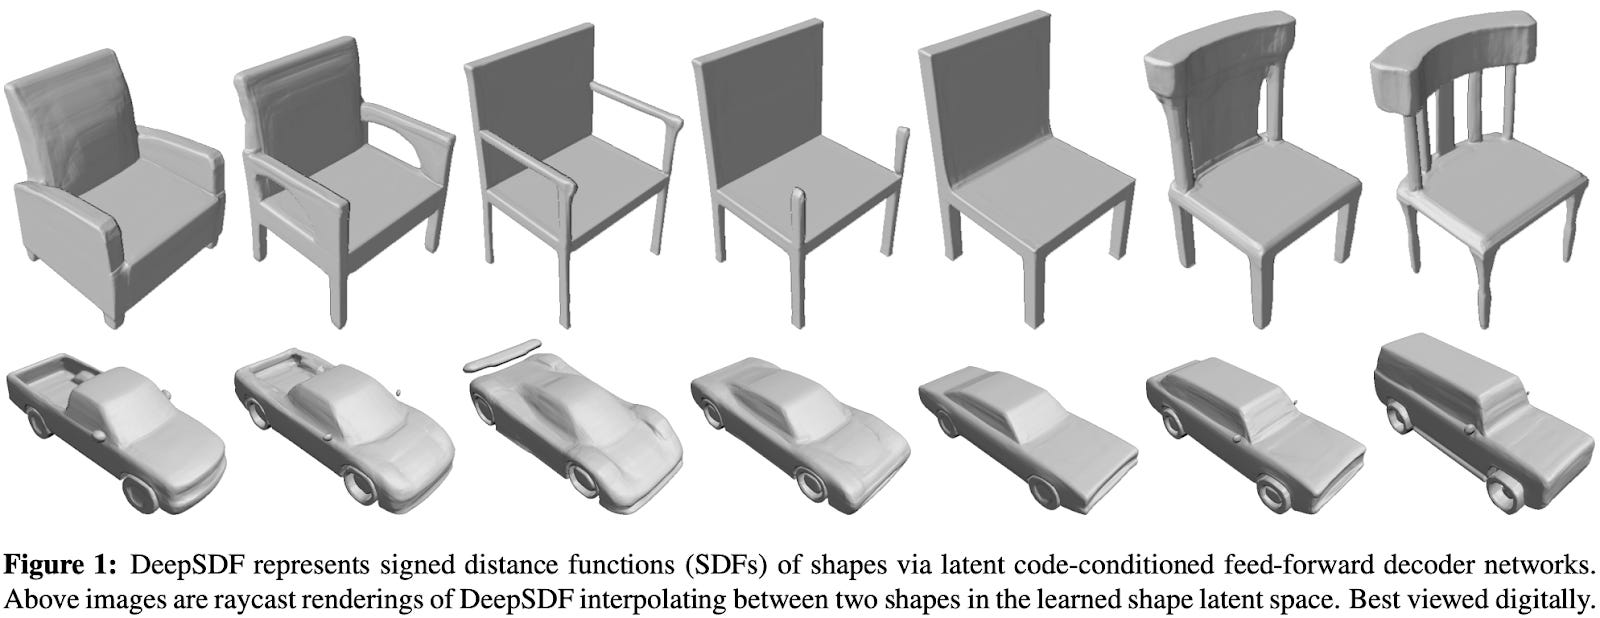 3D Generative Modeling with DeepSDF, by Cameron R. Wolfe, Ph.D.